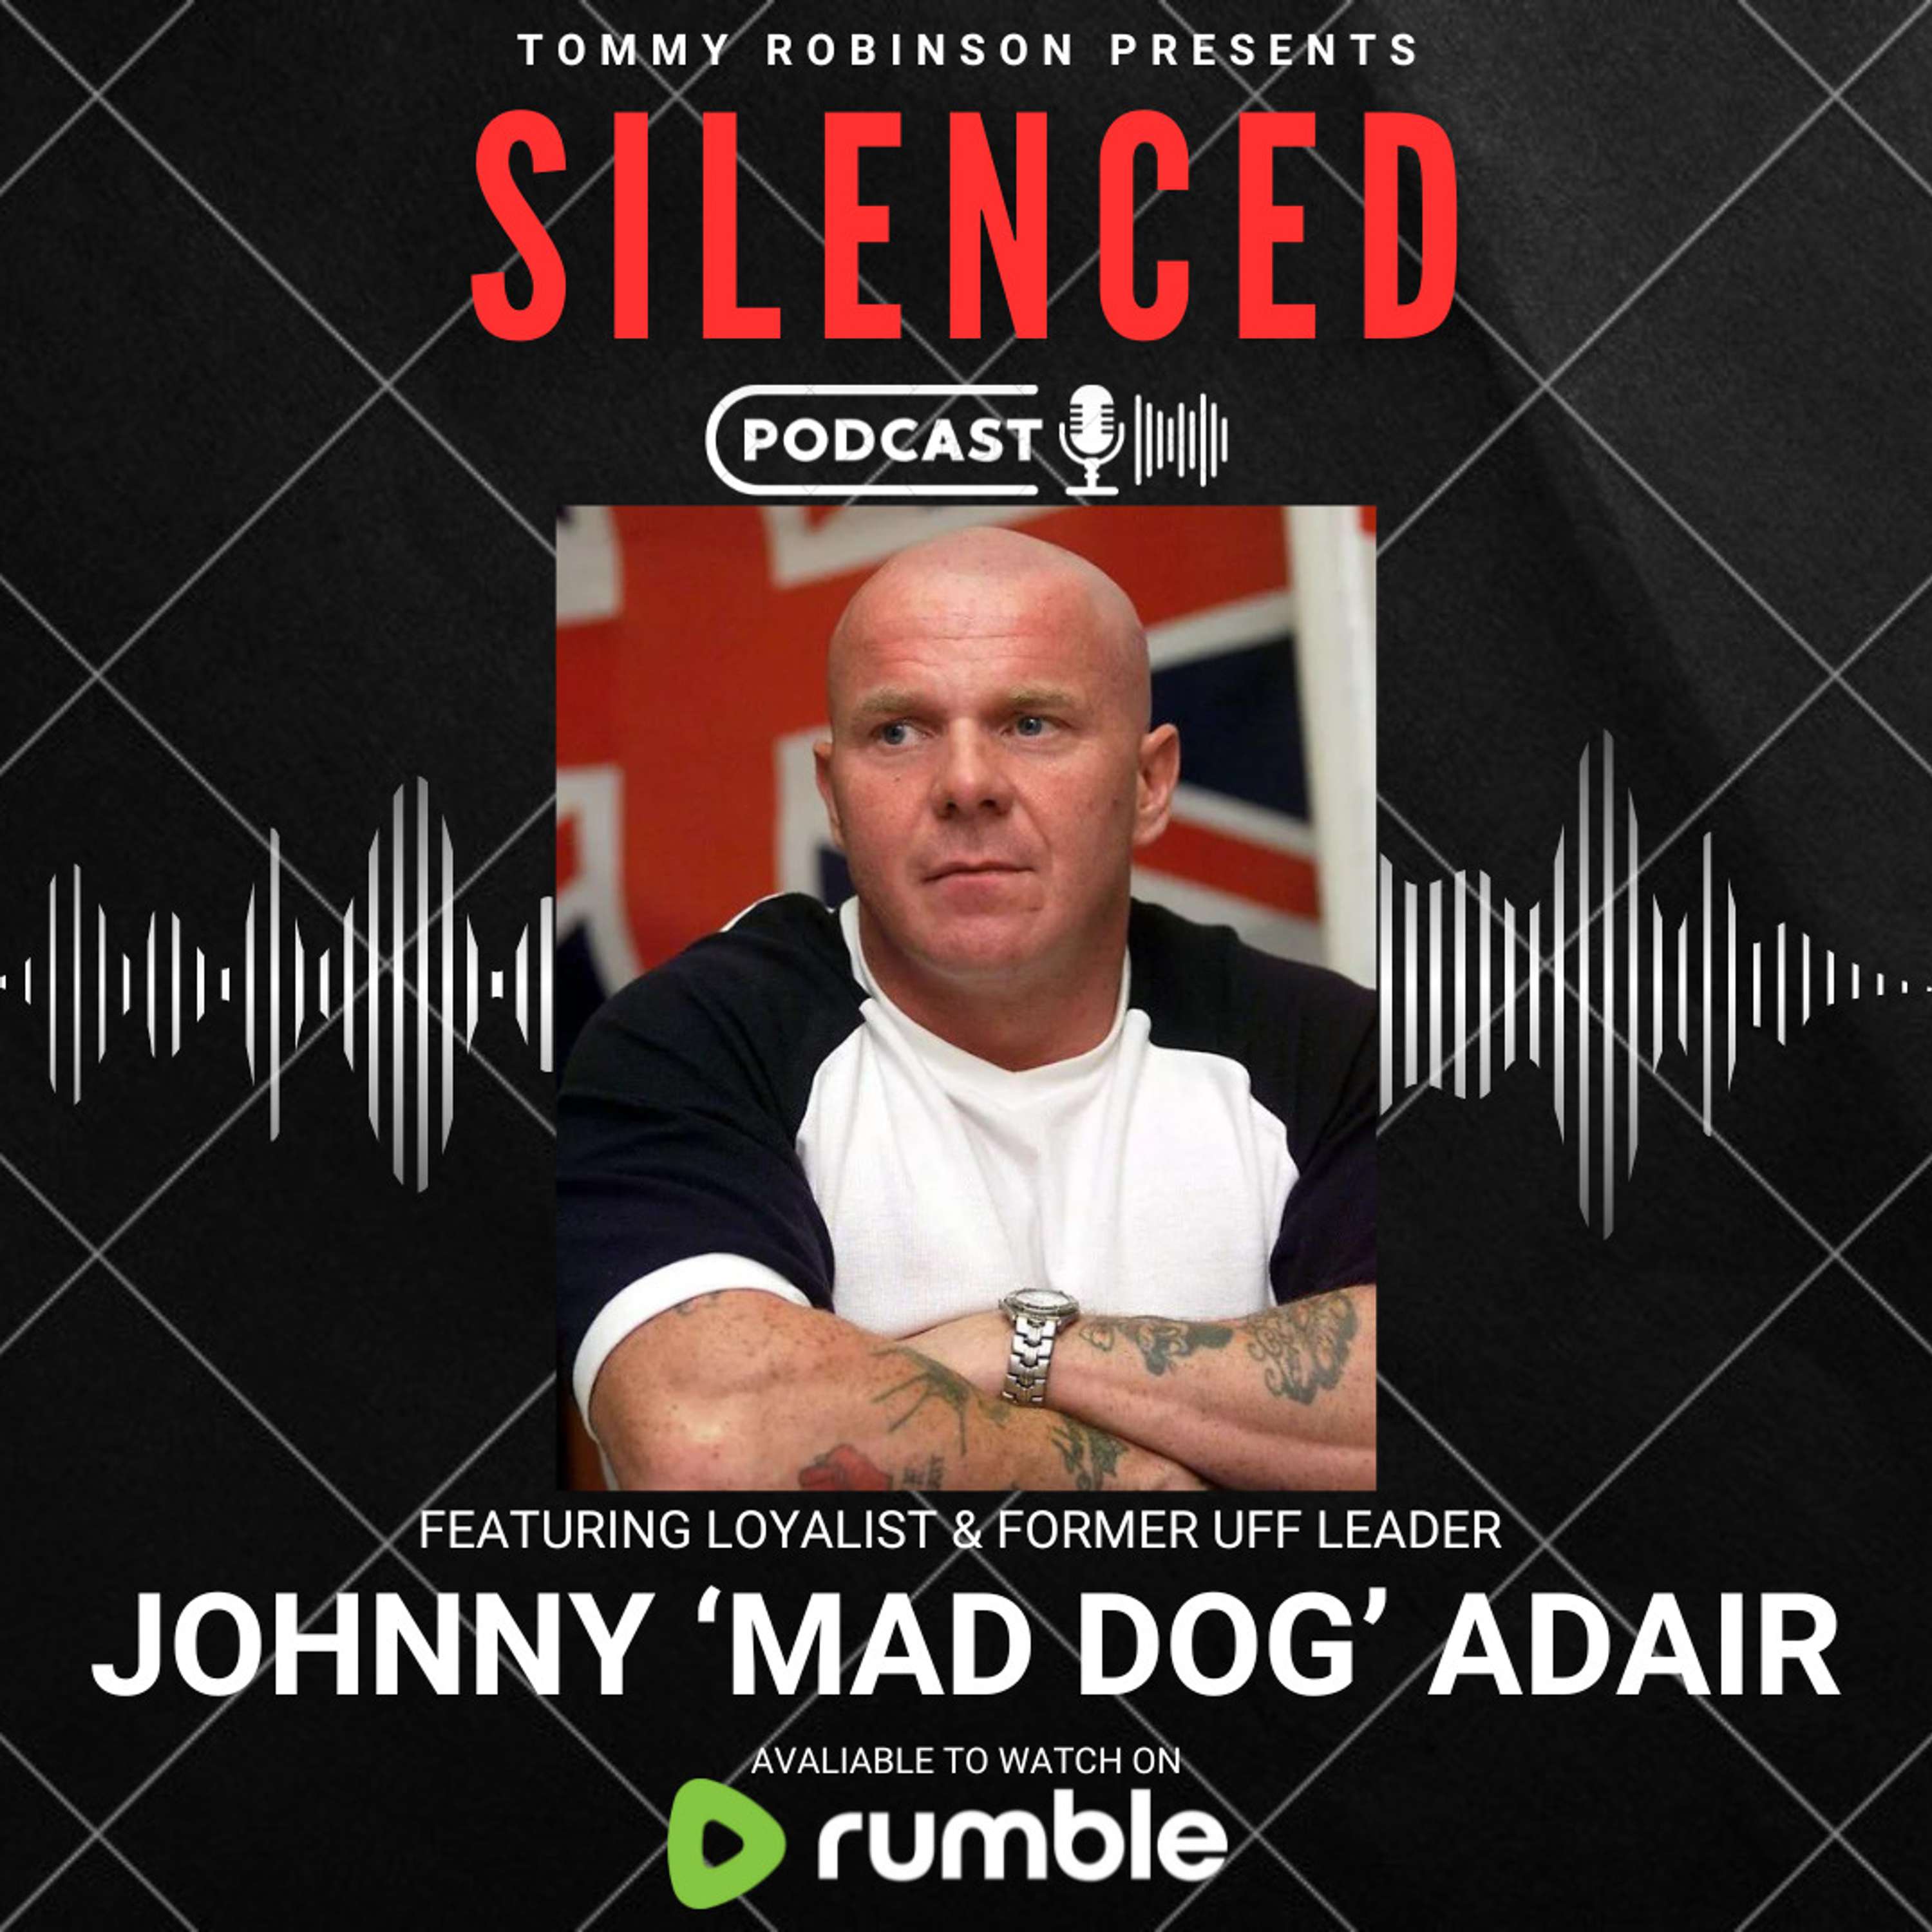 Episode 18 - SILENCED with Tommy Robinson - Johnny ’Mad Dog’ Adair